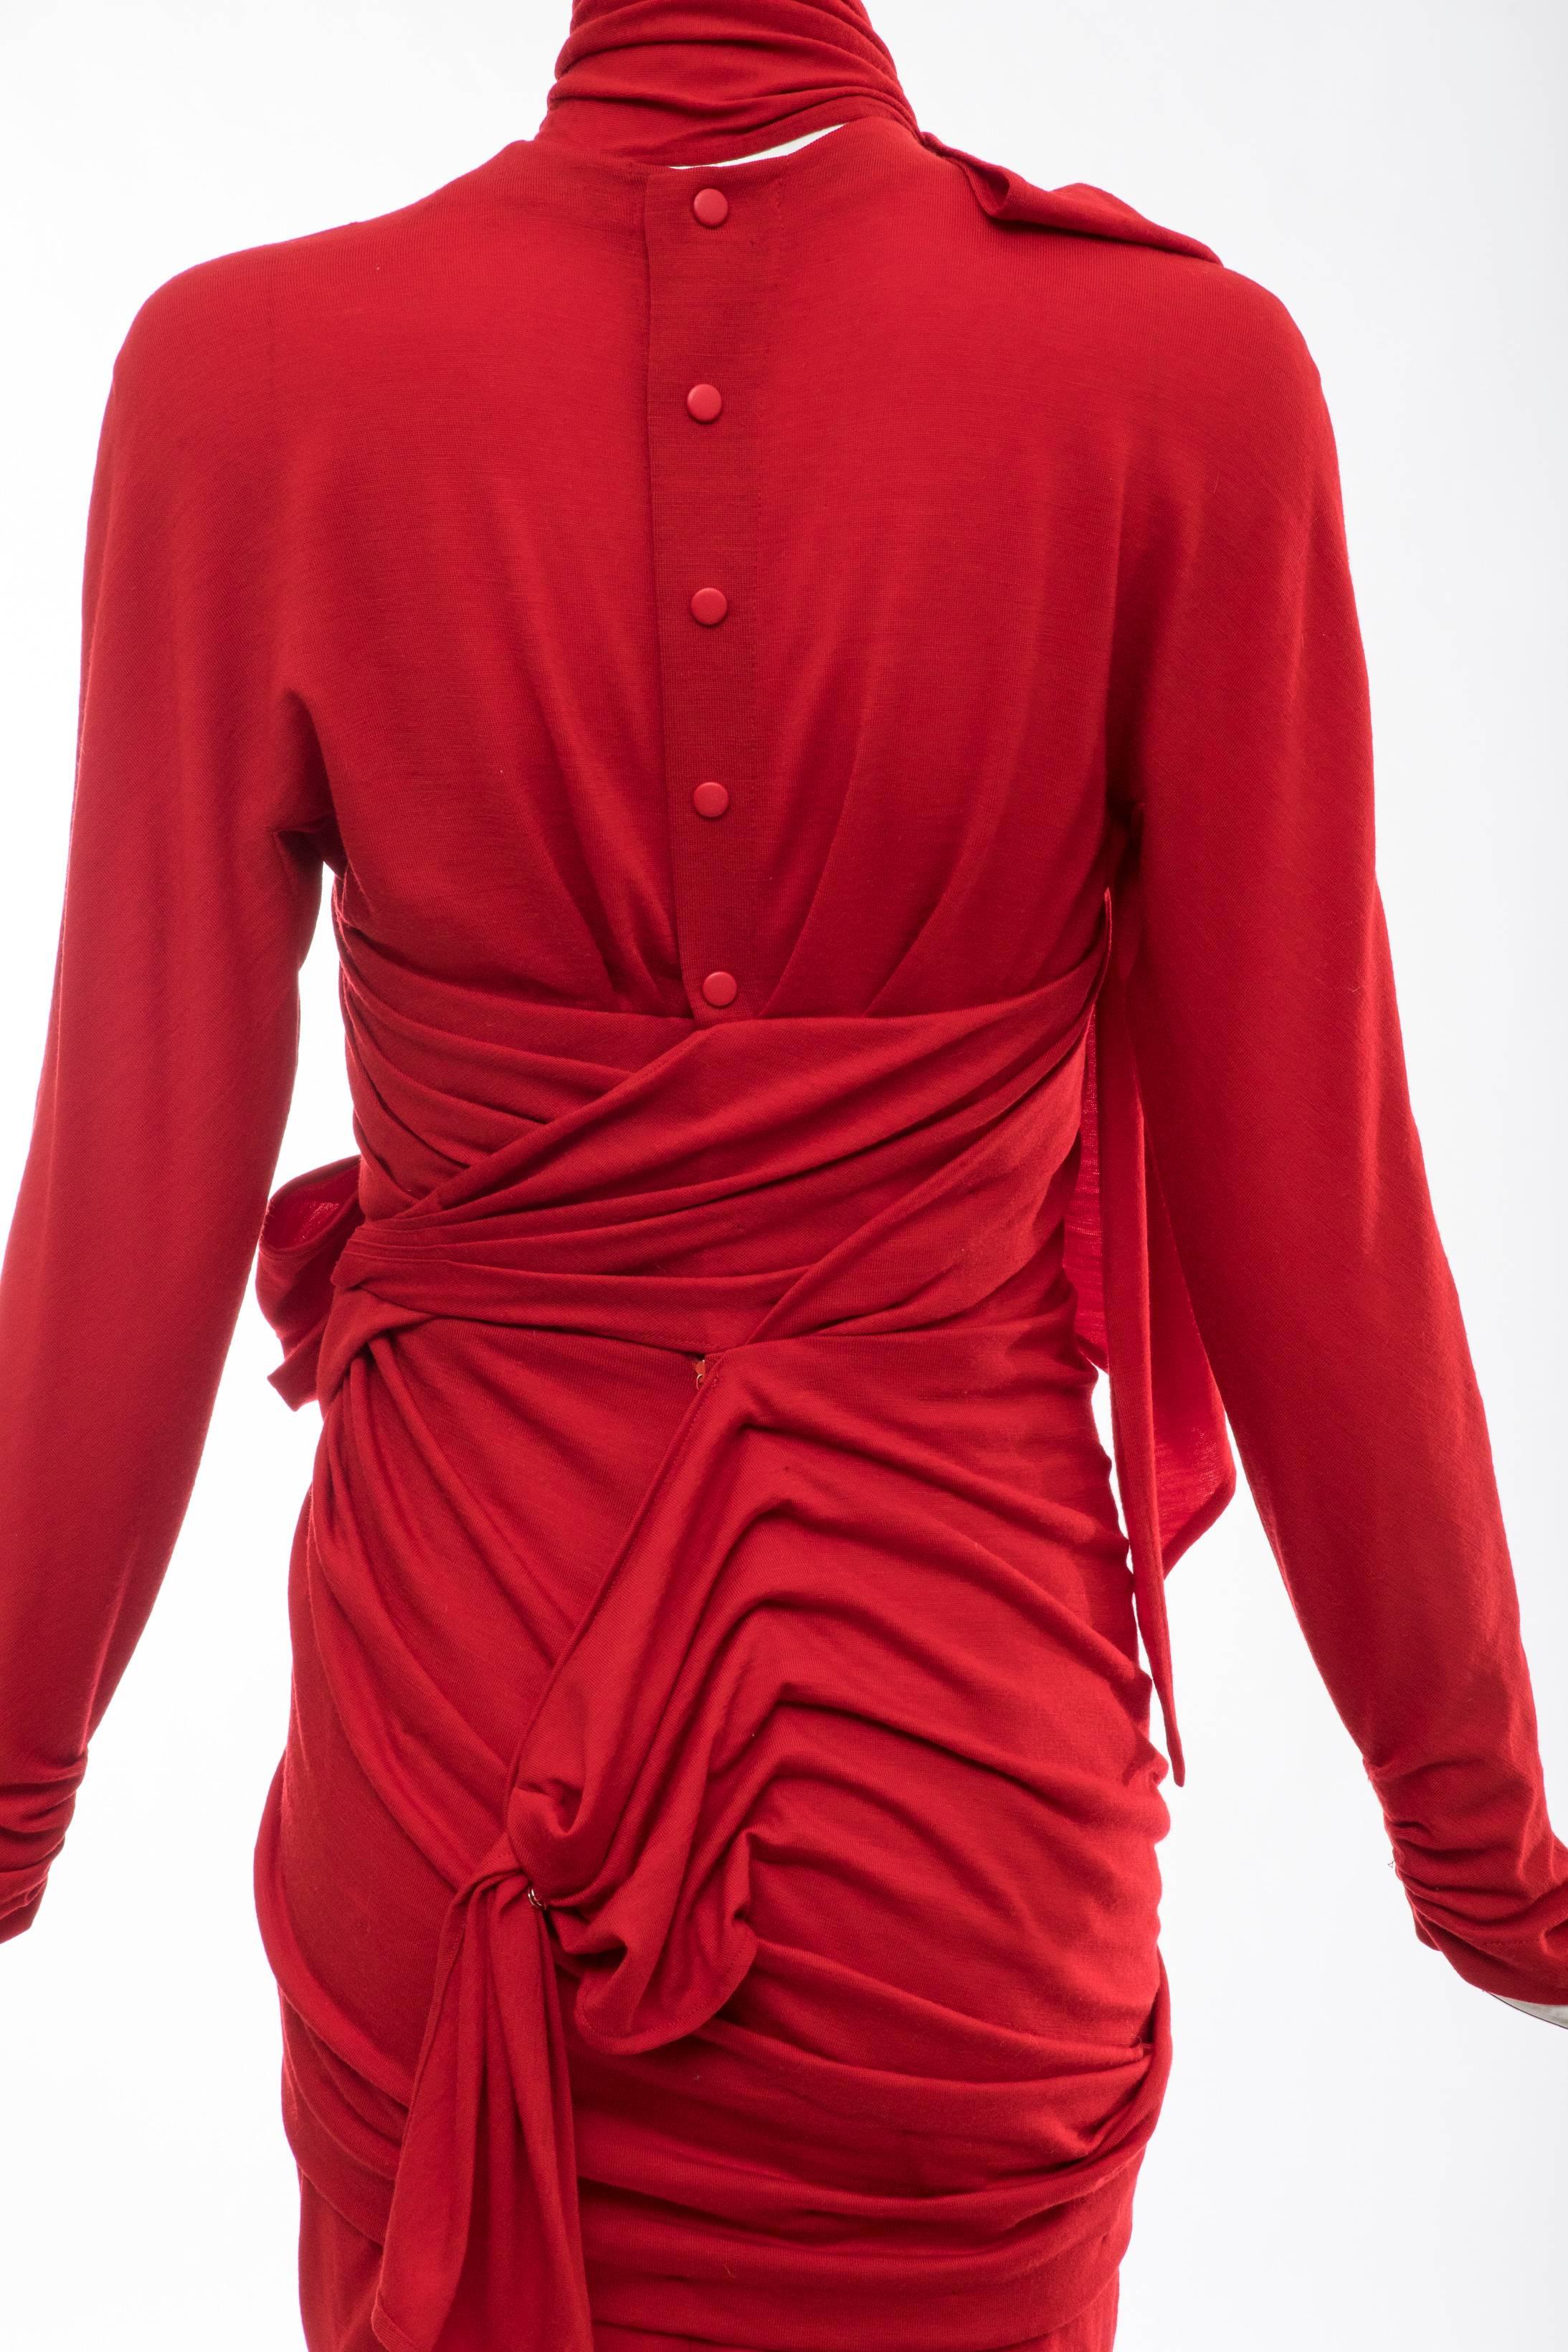 Thierry Mugler Red Wool Jersey Ruched Dress with Built-In-Corset, Circa: 1980's 1